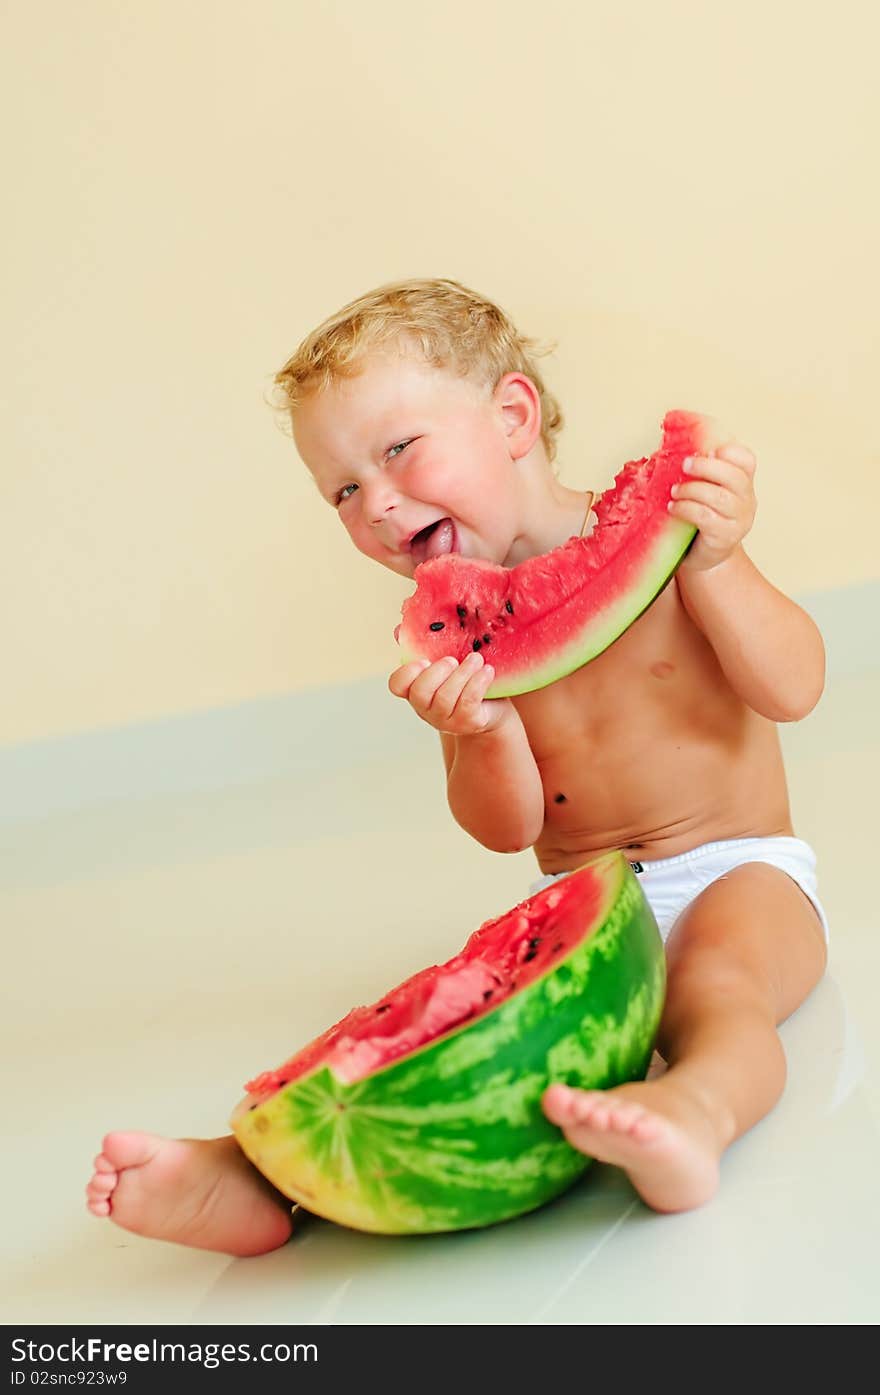 Funny boy eating with appetite ripe watermelon. Funny boy eating with appetite ripe watermelon